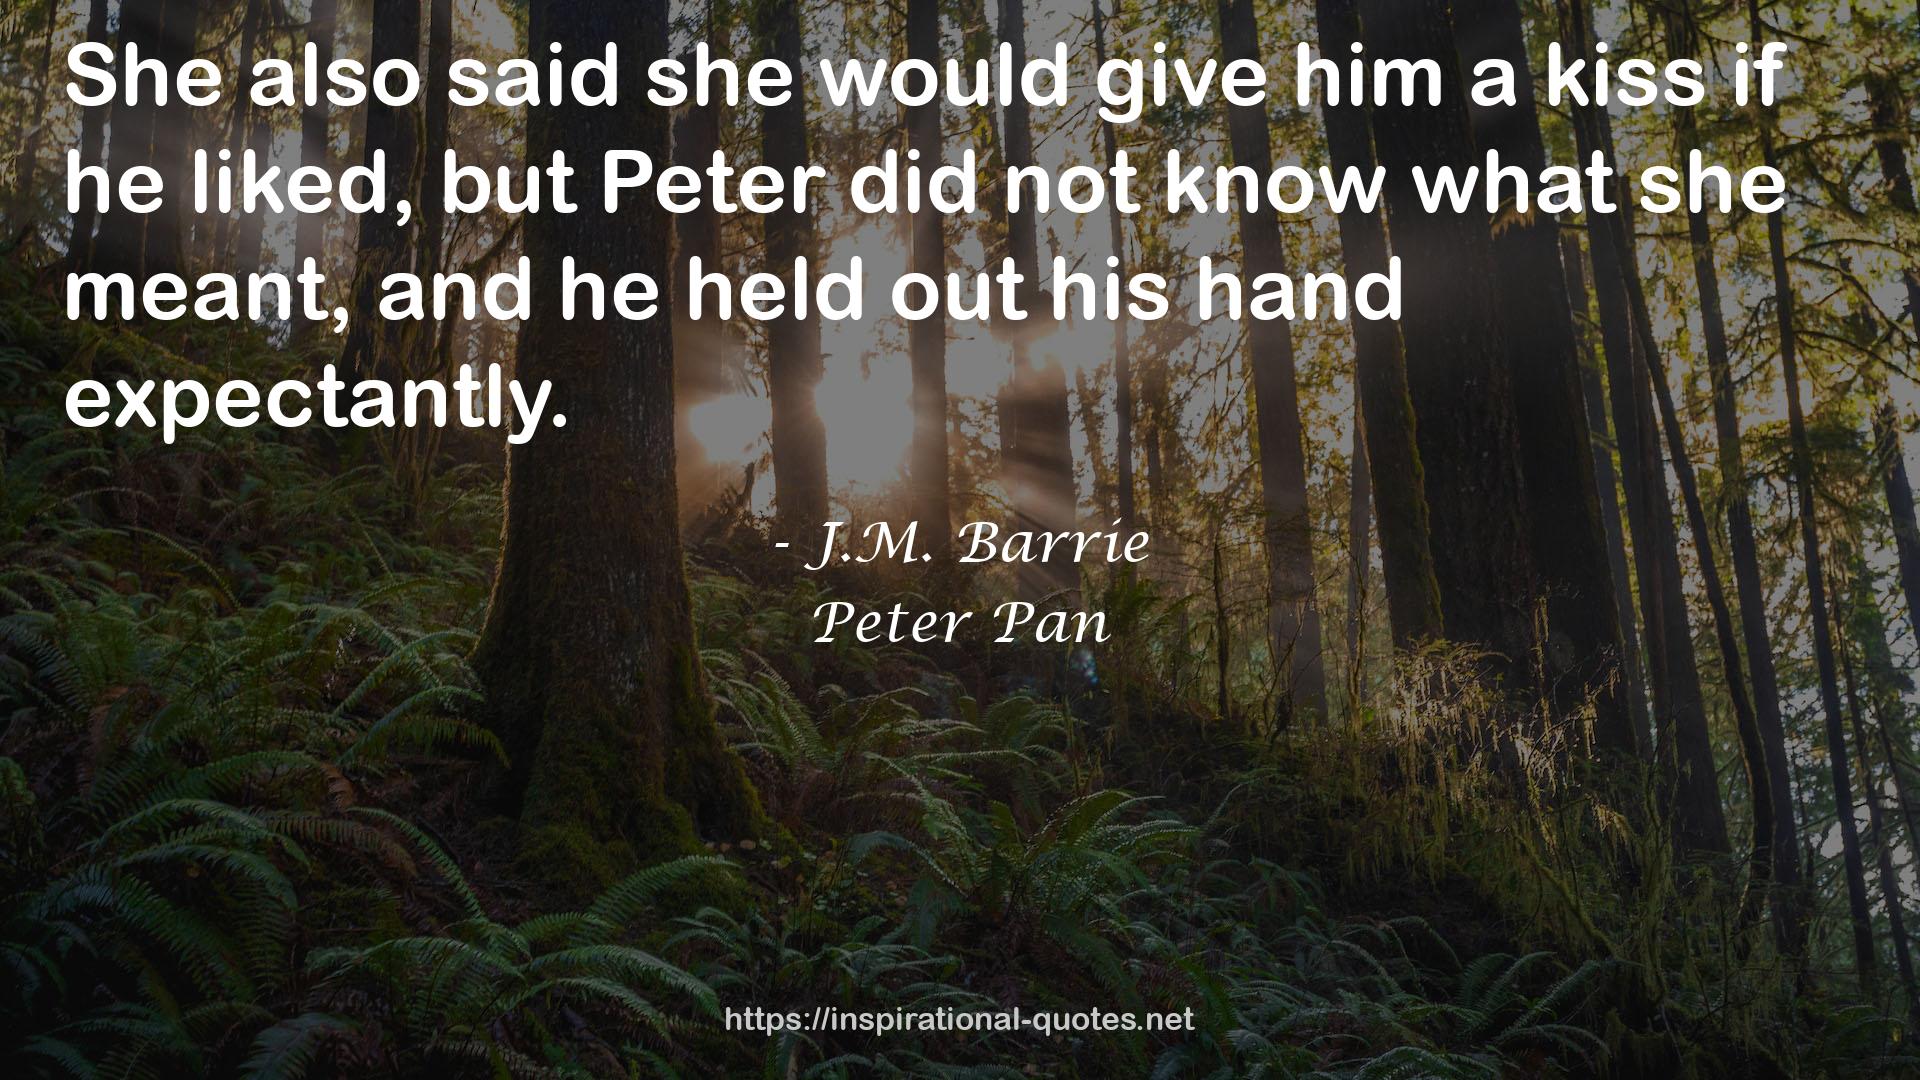 J.M. Barrie QUOTES